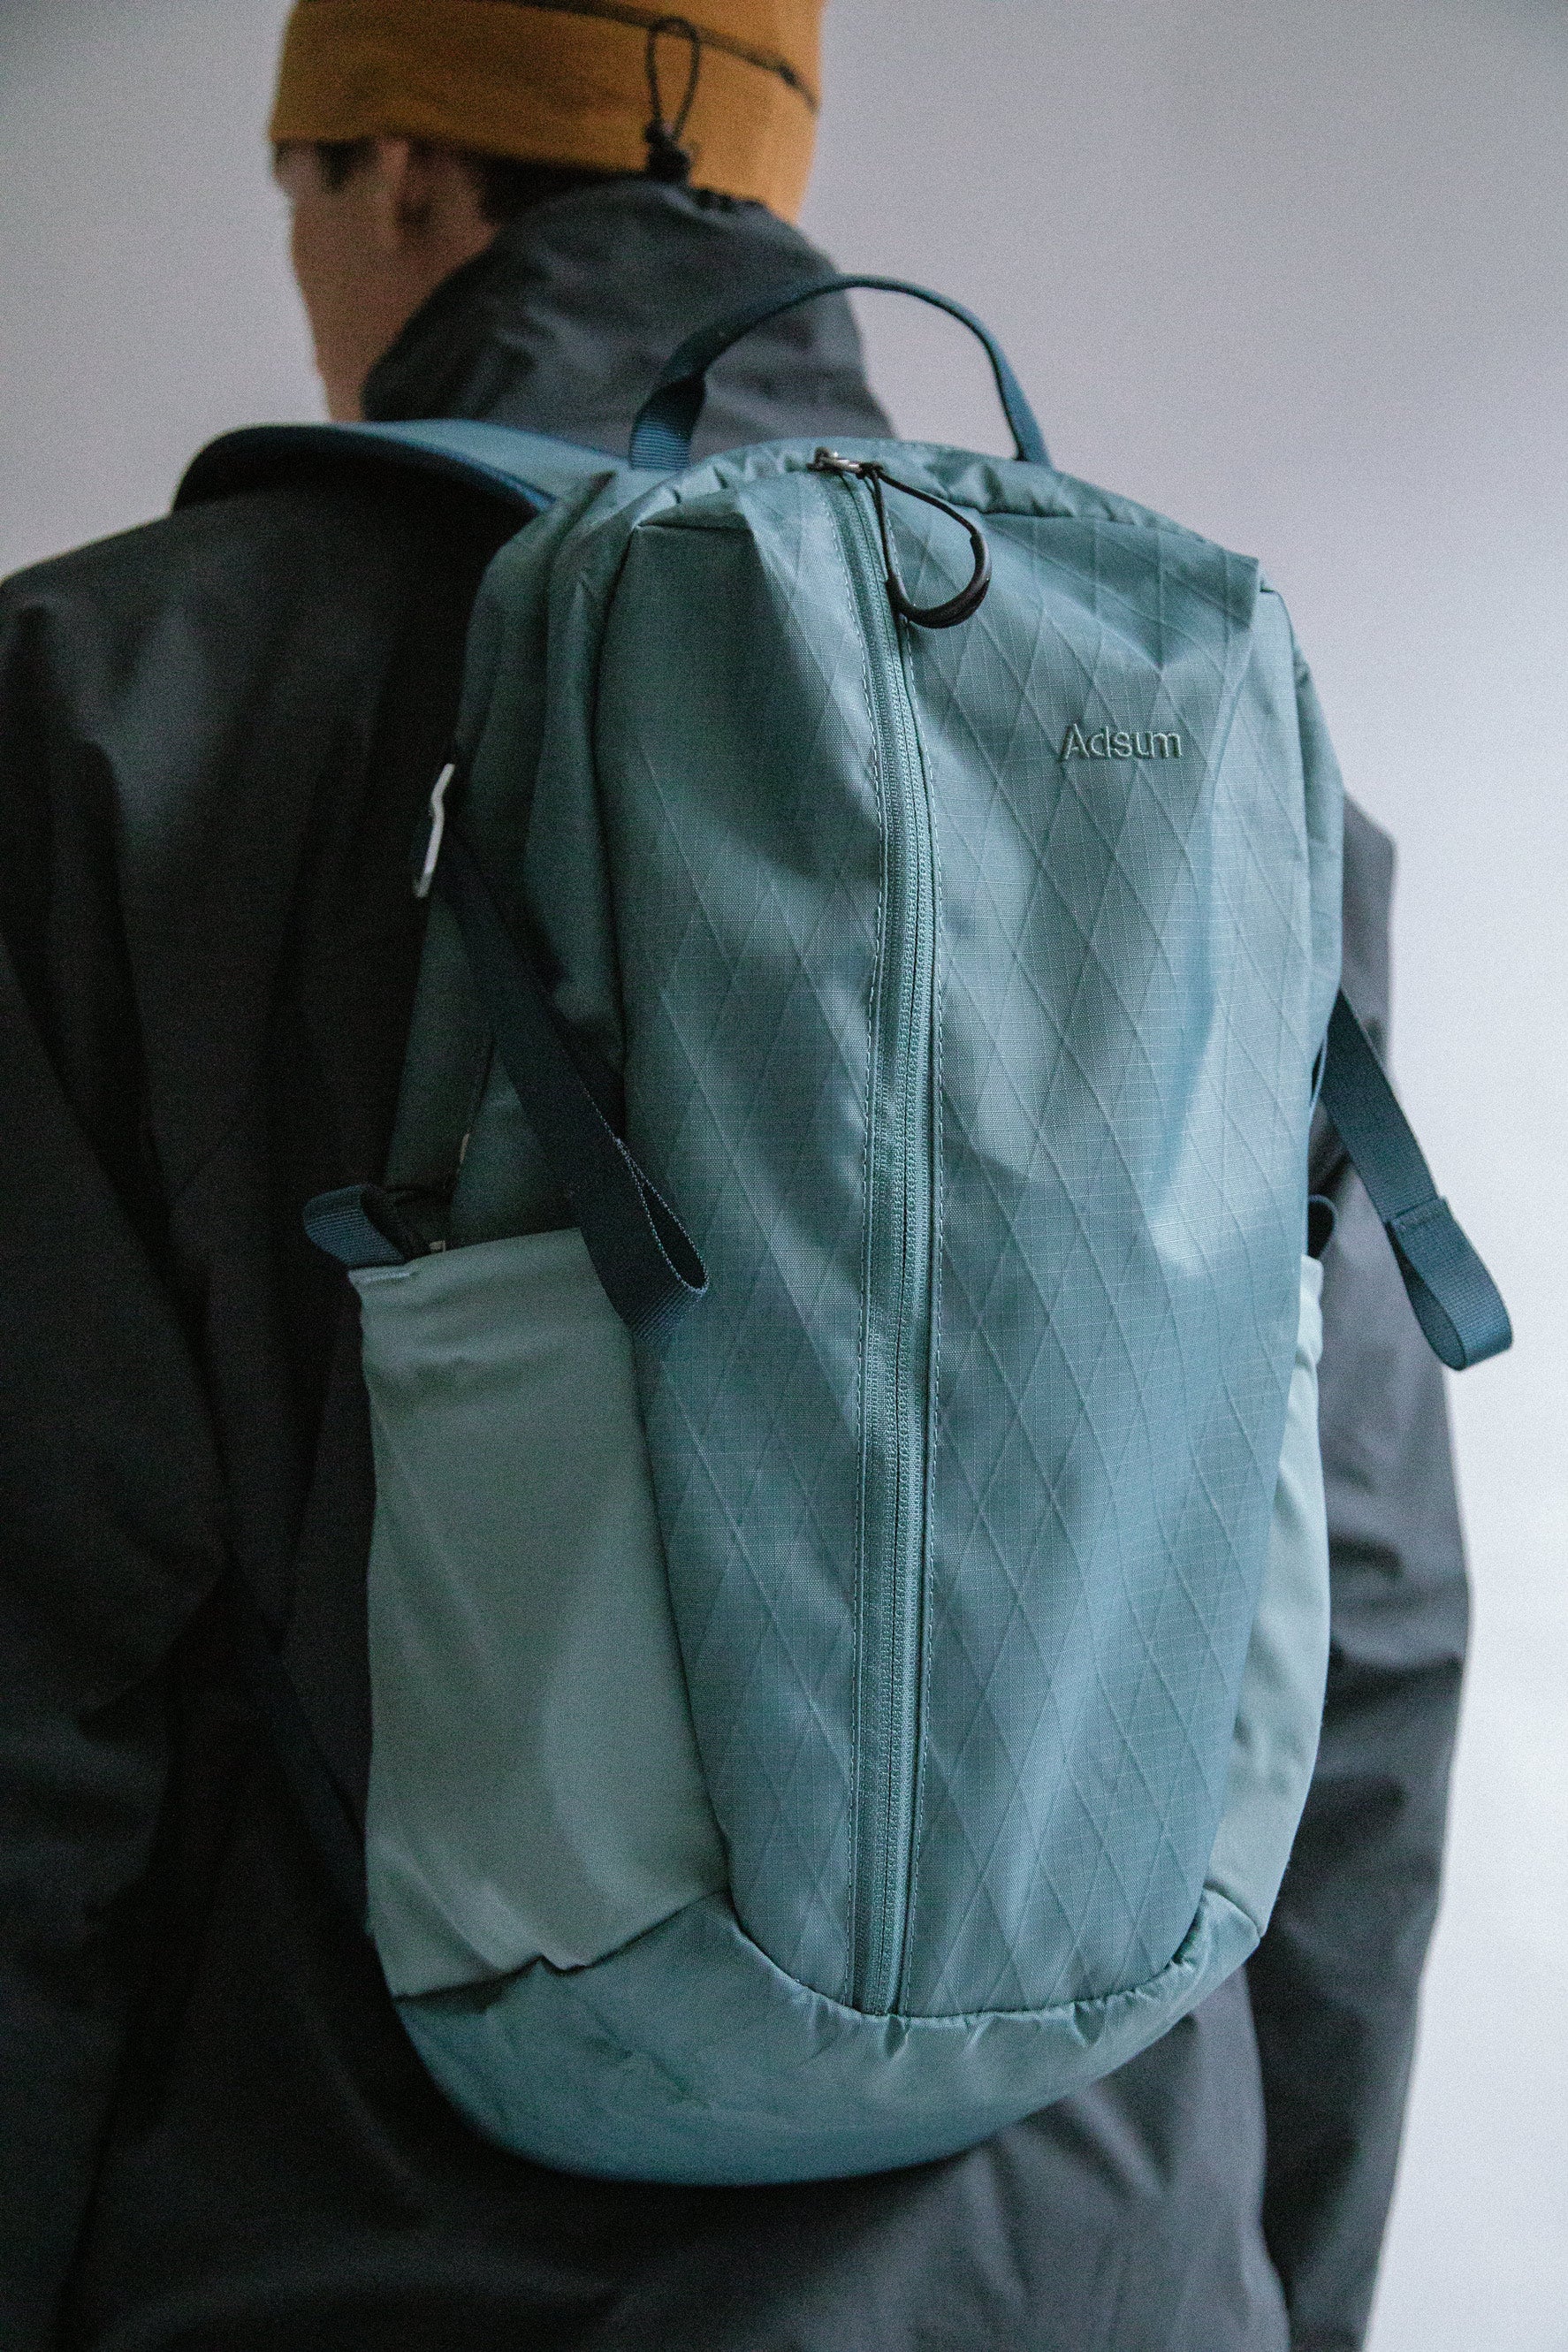 Juniper Systems Large GIS Backpack with Adjustable Cam-lock Antenna Pole